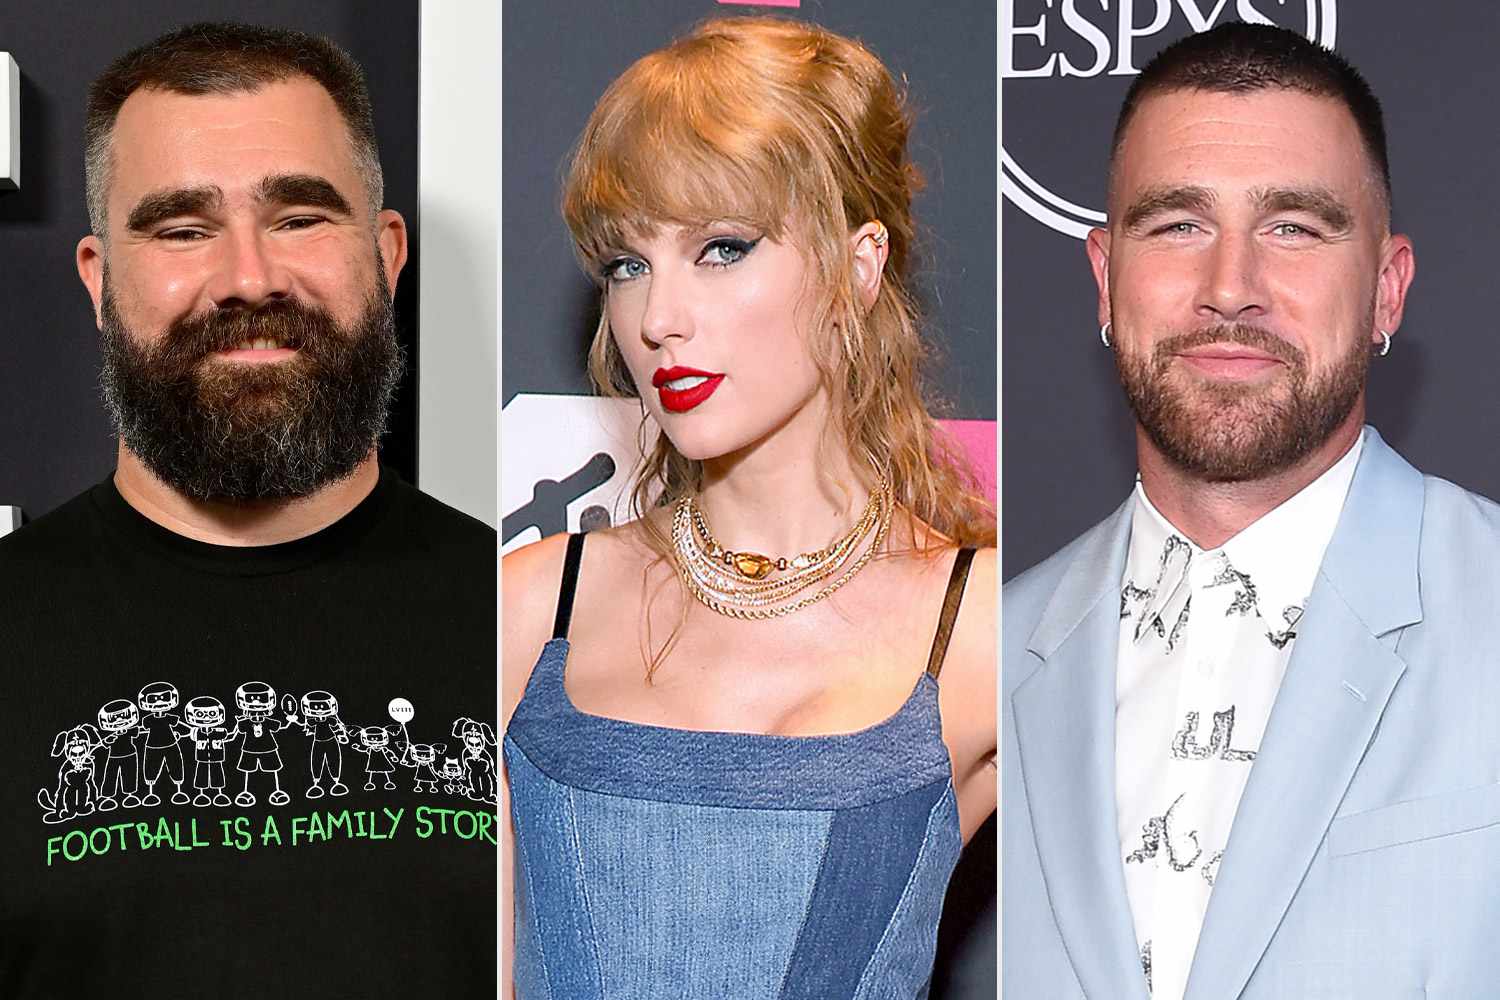 Jason Kelce knew the Everyone would ‘lose God damn mind’ over Travis Kelce and Taylor Swift